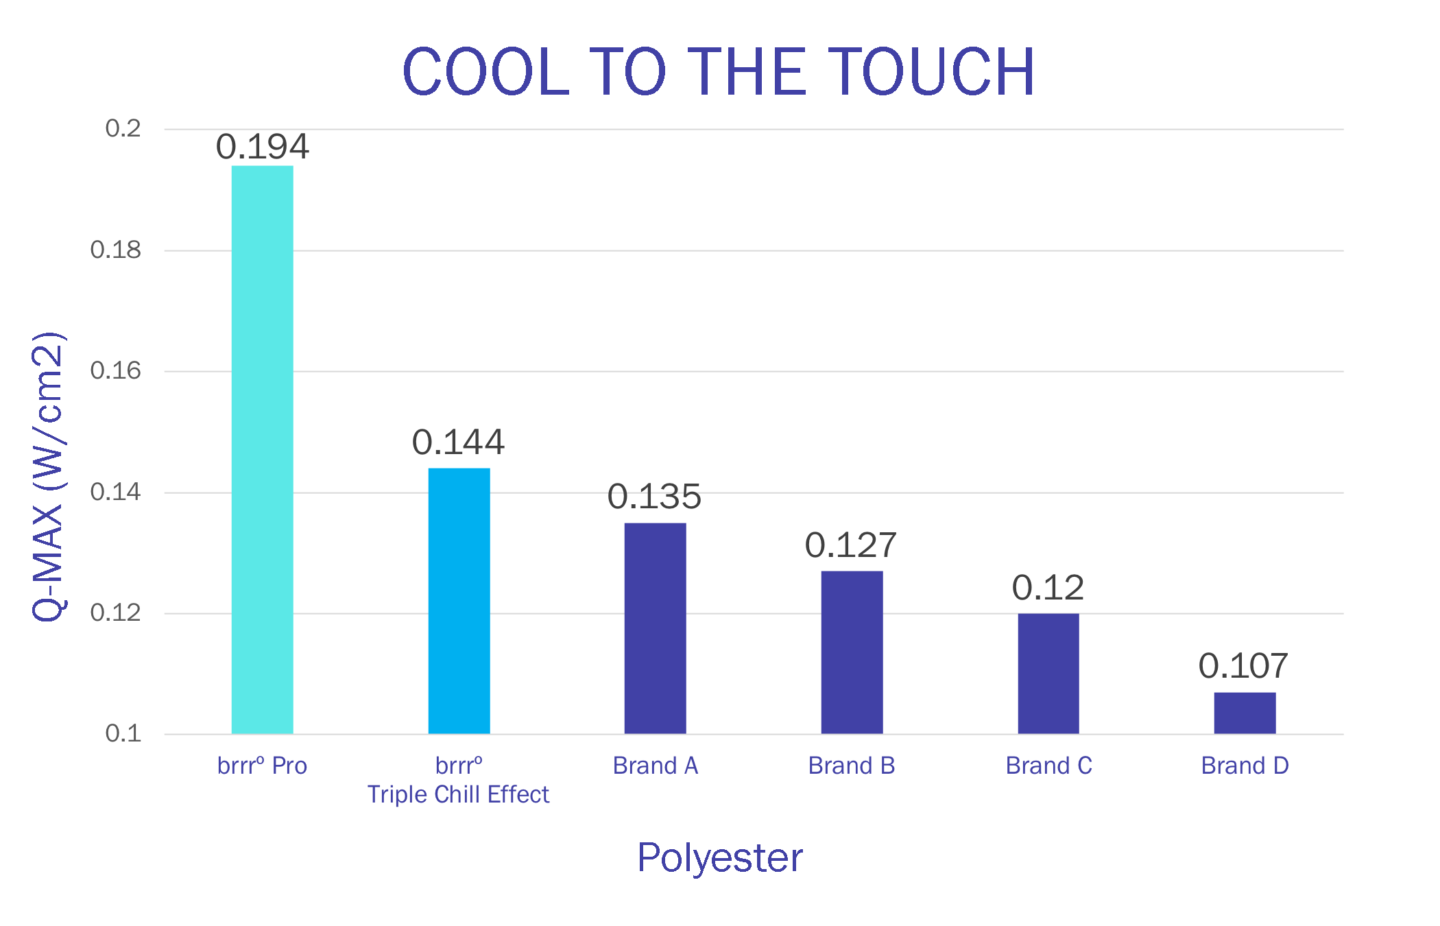 brrr cool to the touch test results